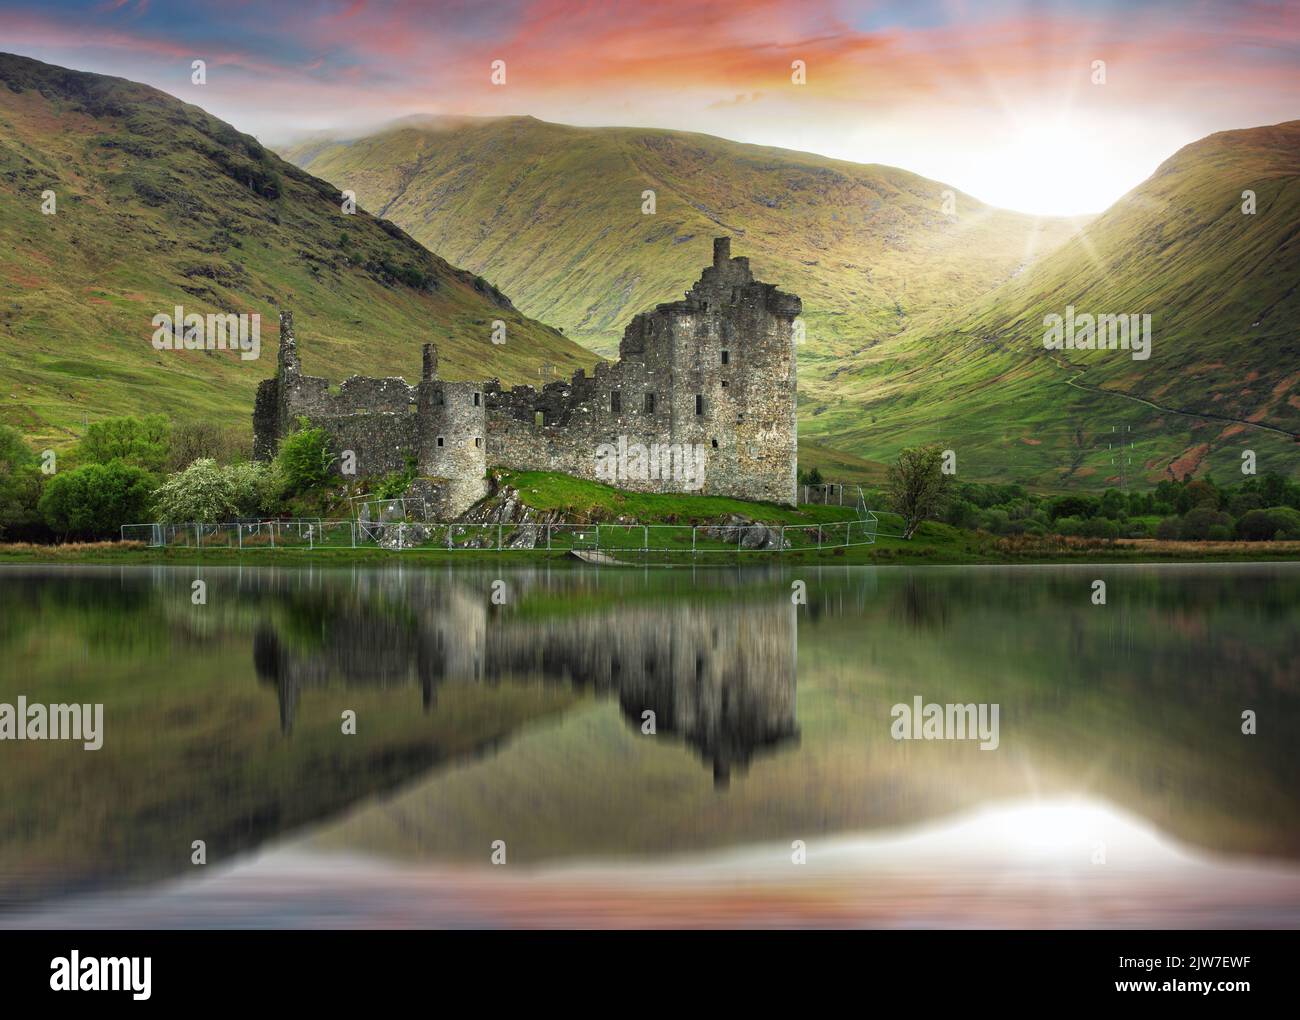 Scotland landscape - Kilchurn Castle with reflection in water at dramatic sunset Stock Photo